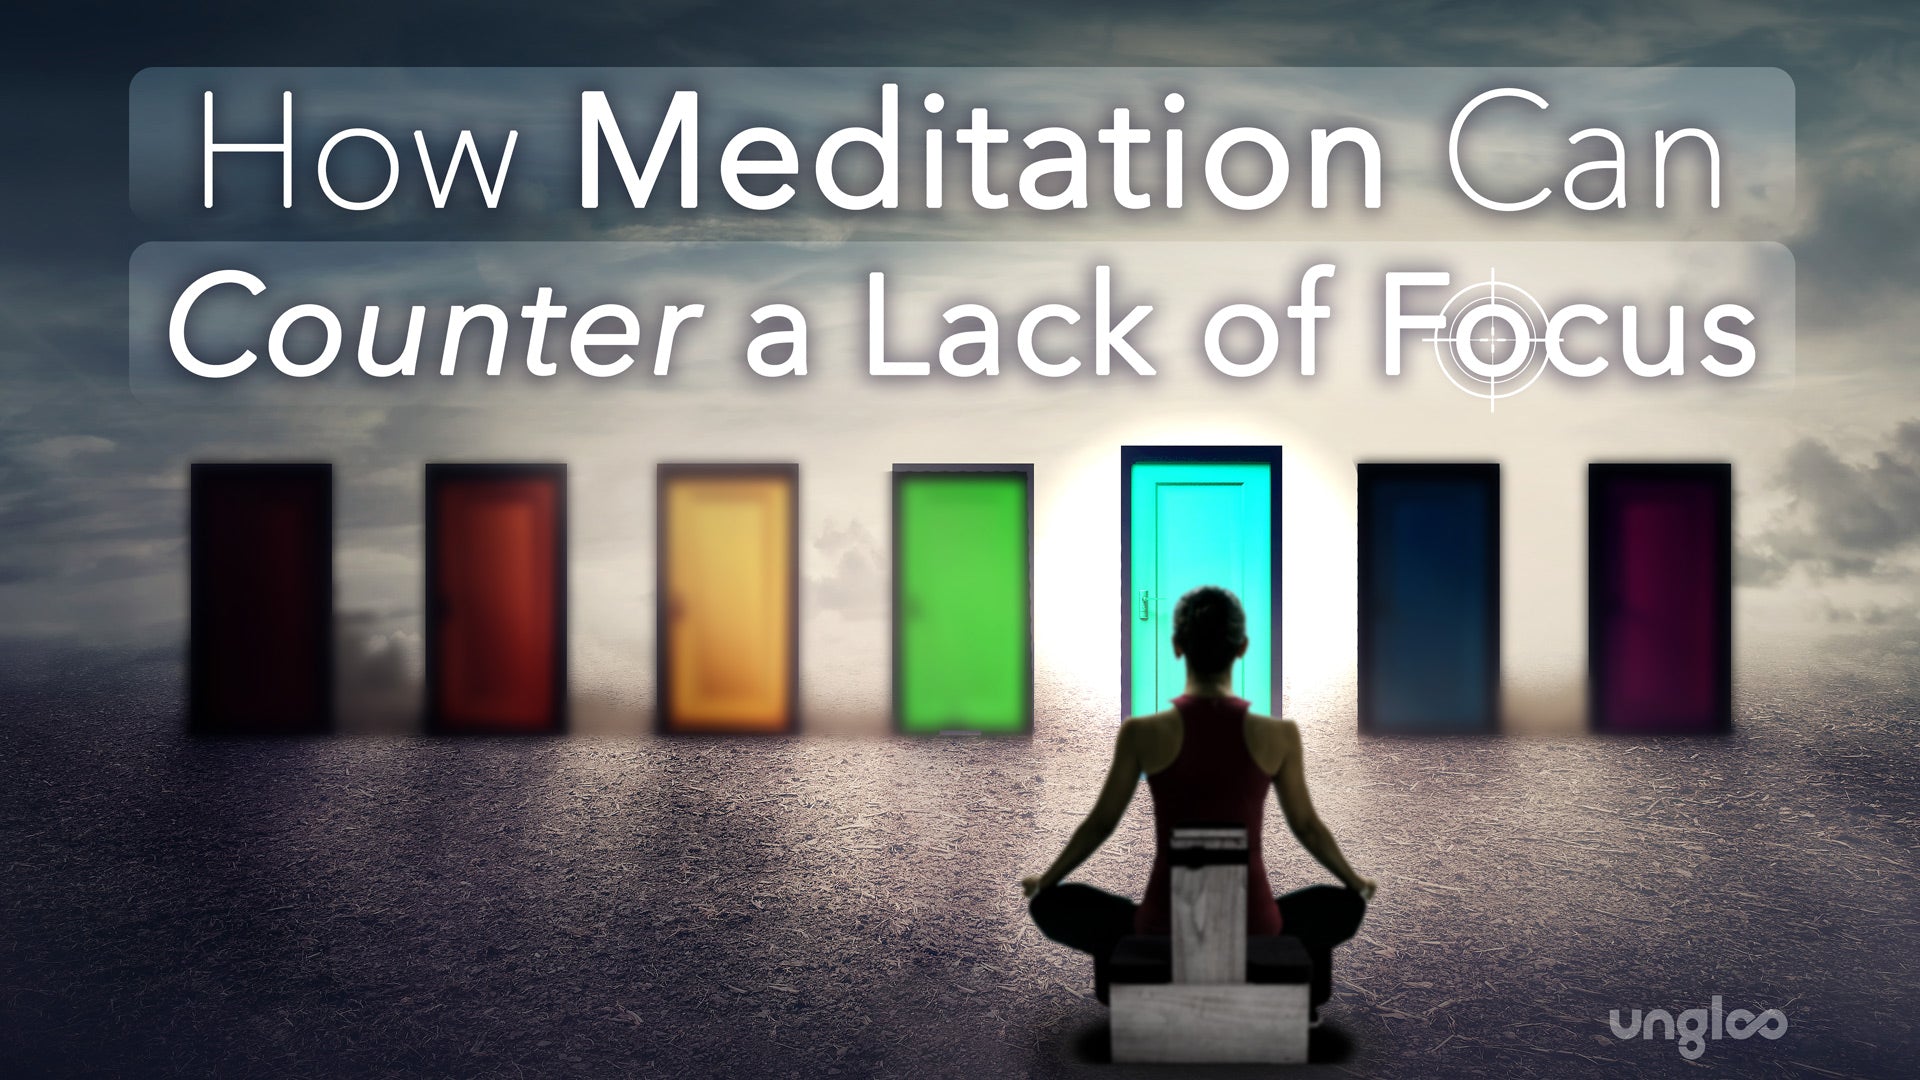 How Meditation Can Counter a Lack of Focus